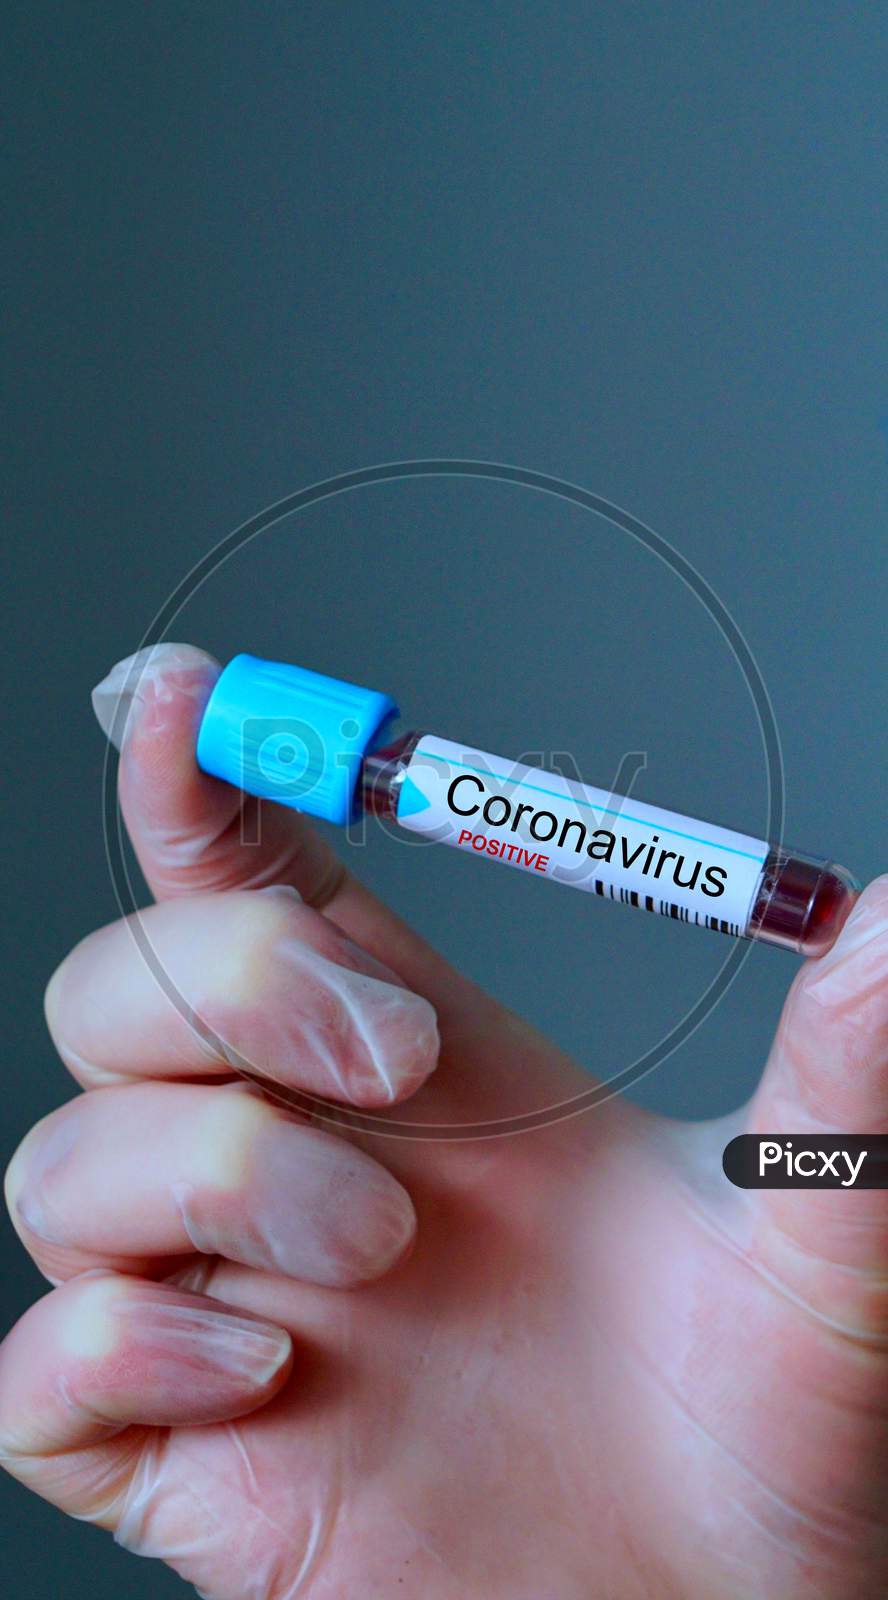 Hands With Protective Glove, Examining A Novel Corona Virus Test Tube The Result Is Positive.